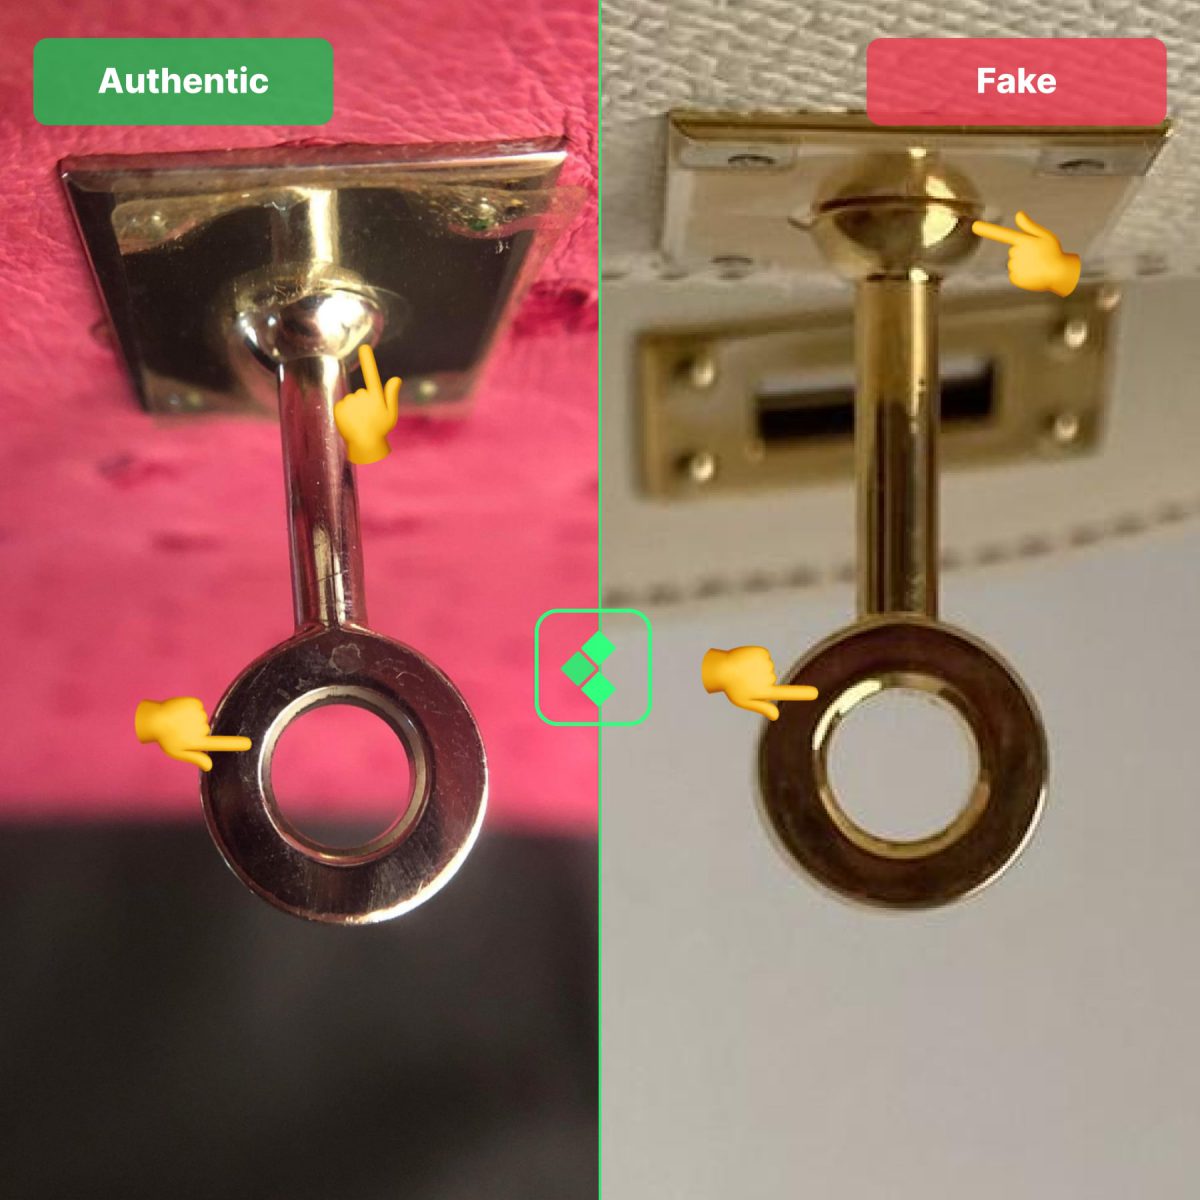 Authentic vs fake comparison of the Hermès Kelly bag's closure ring (buckle)